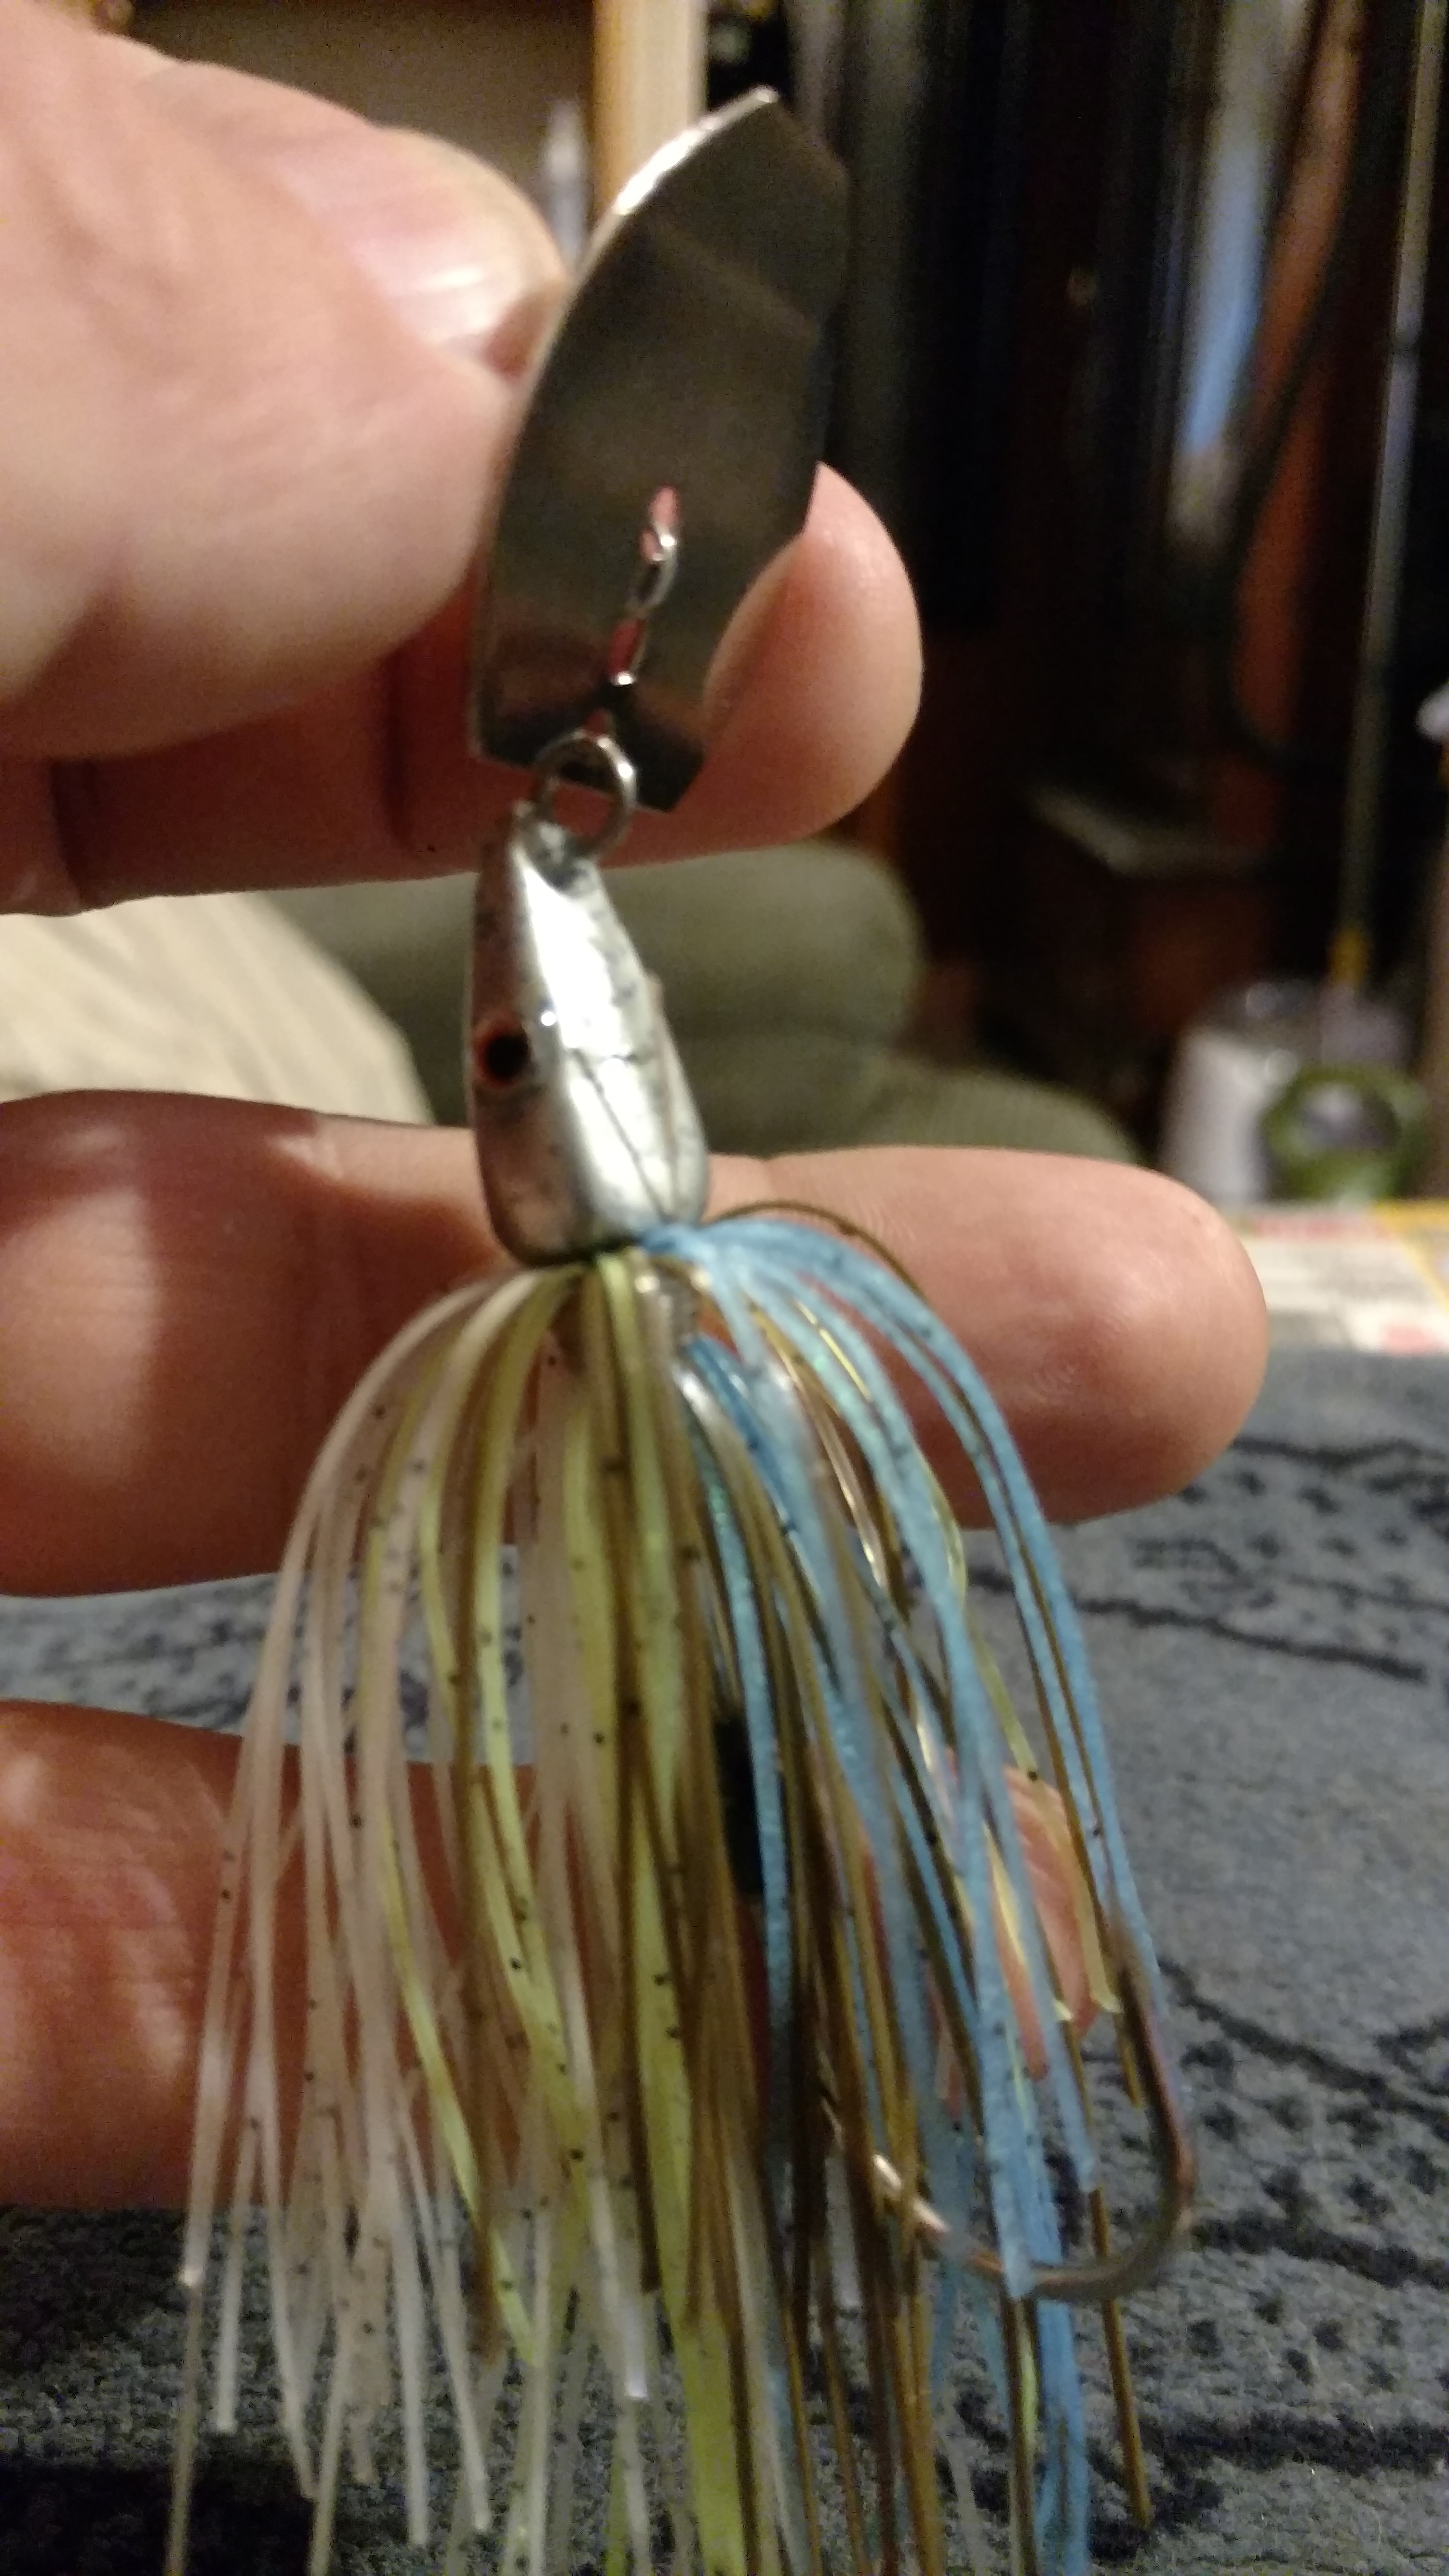 Spinnerbait/Chatterbait box - Fishing Tackle - Bass Fishing Forums